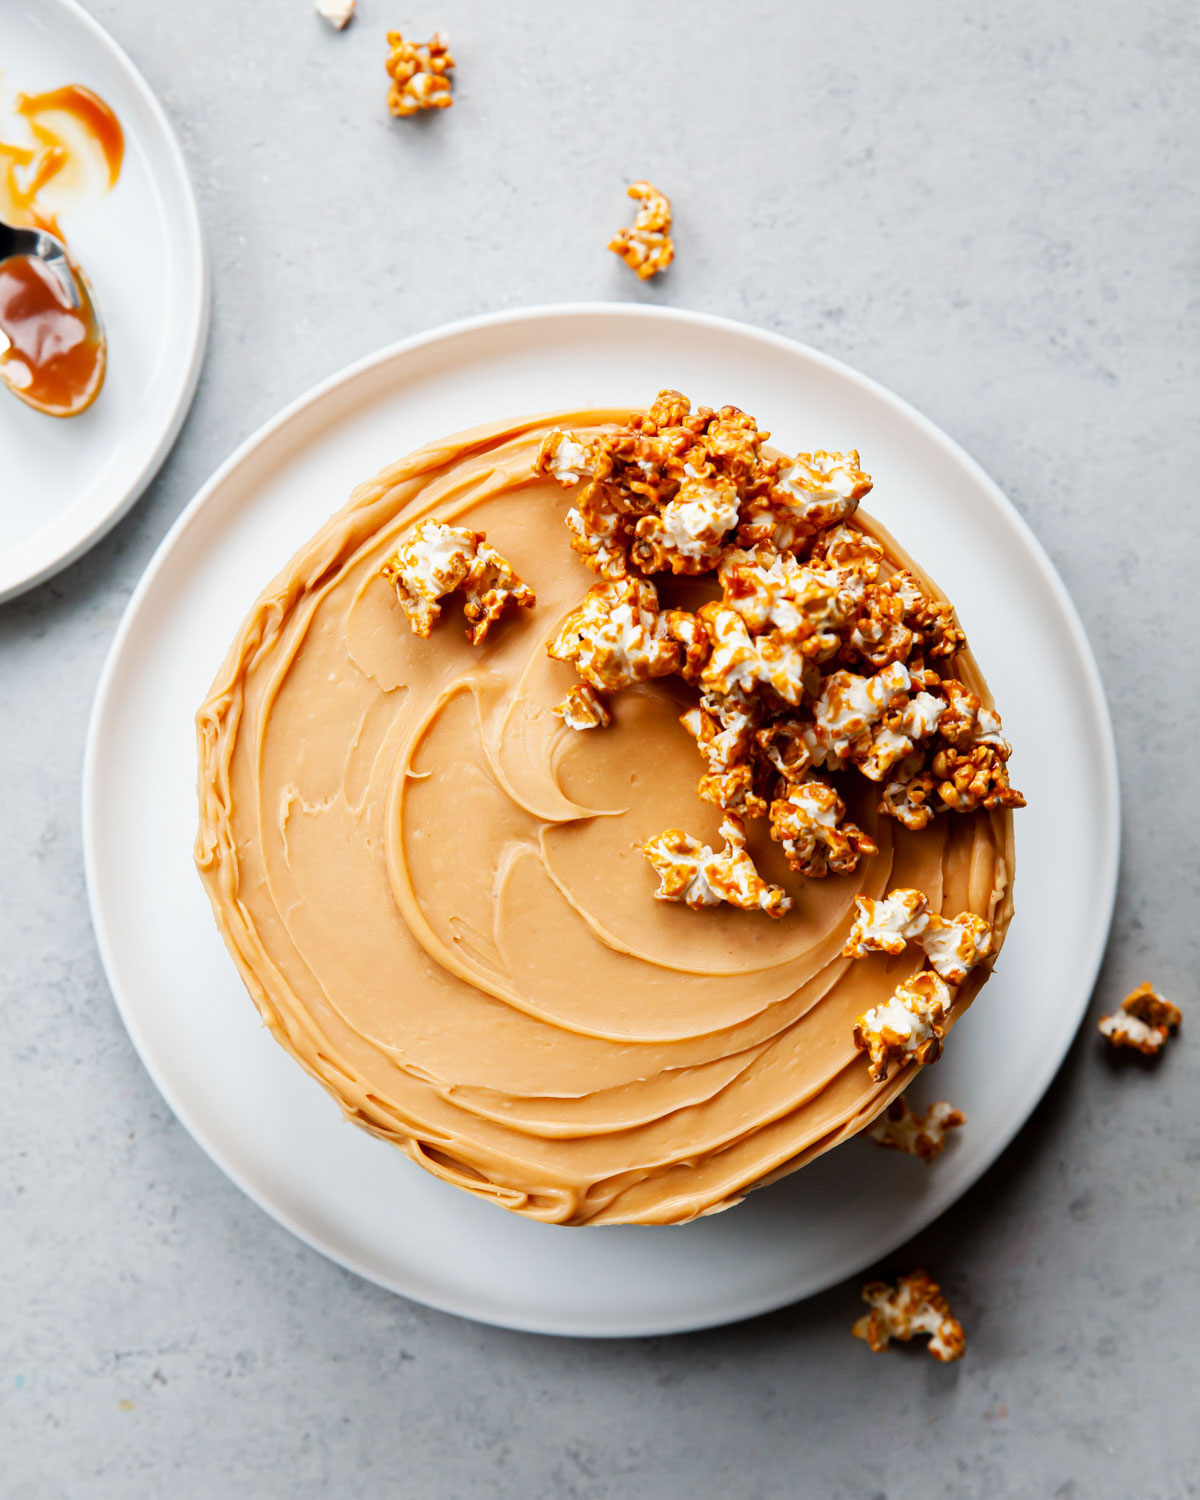 An overhead image of a caramel frosting cake with caramel popcorn on top